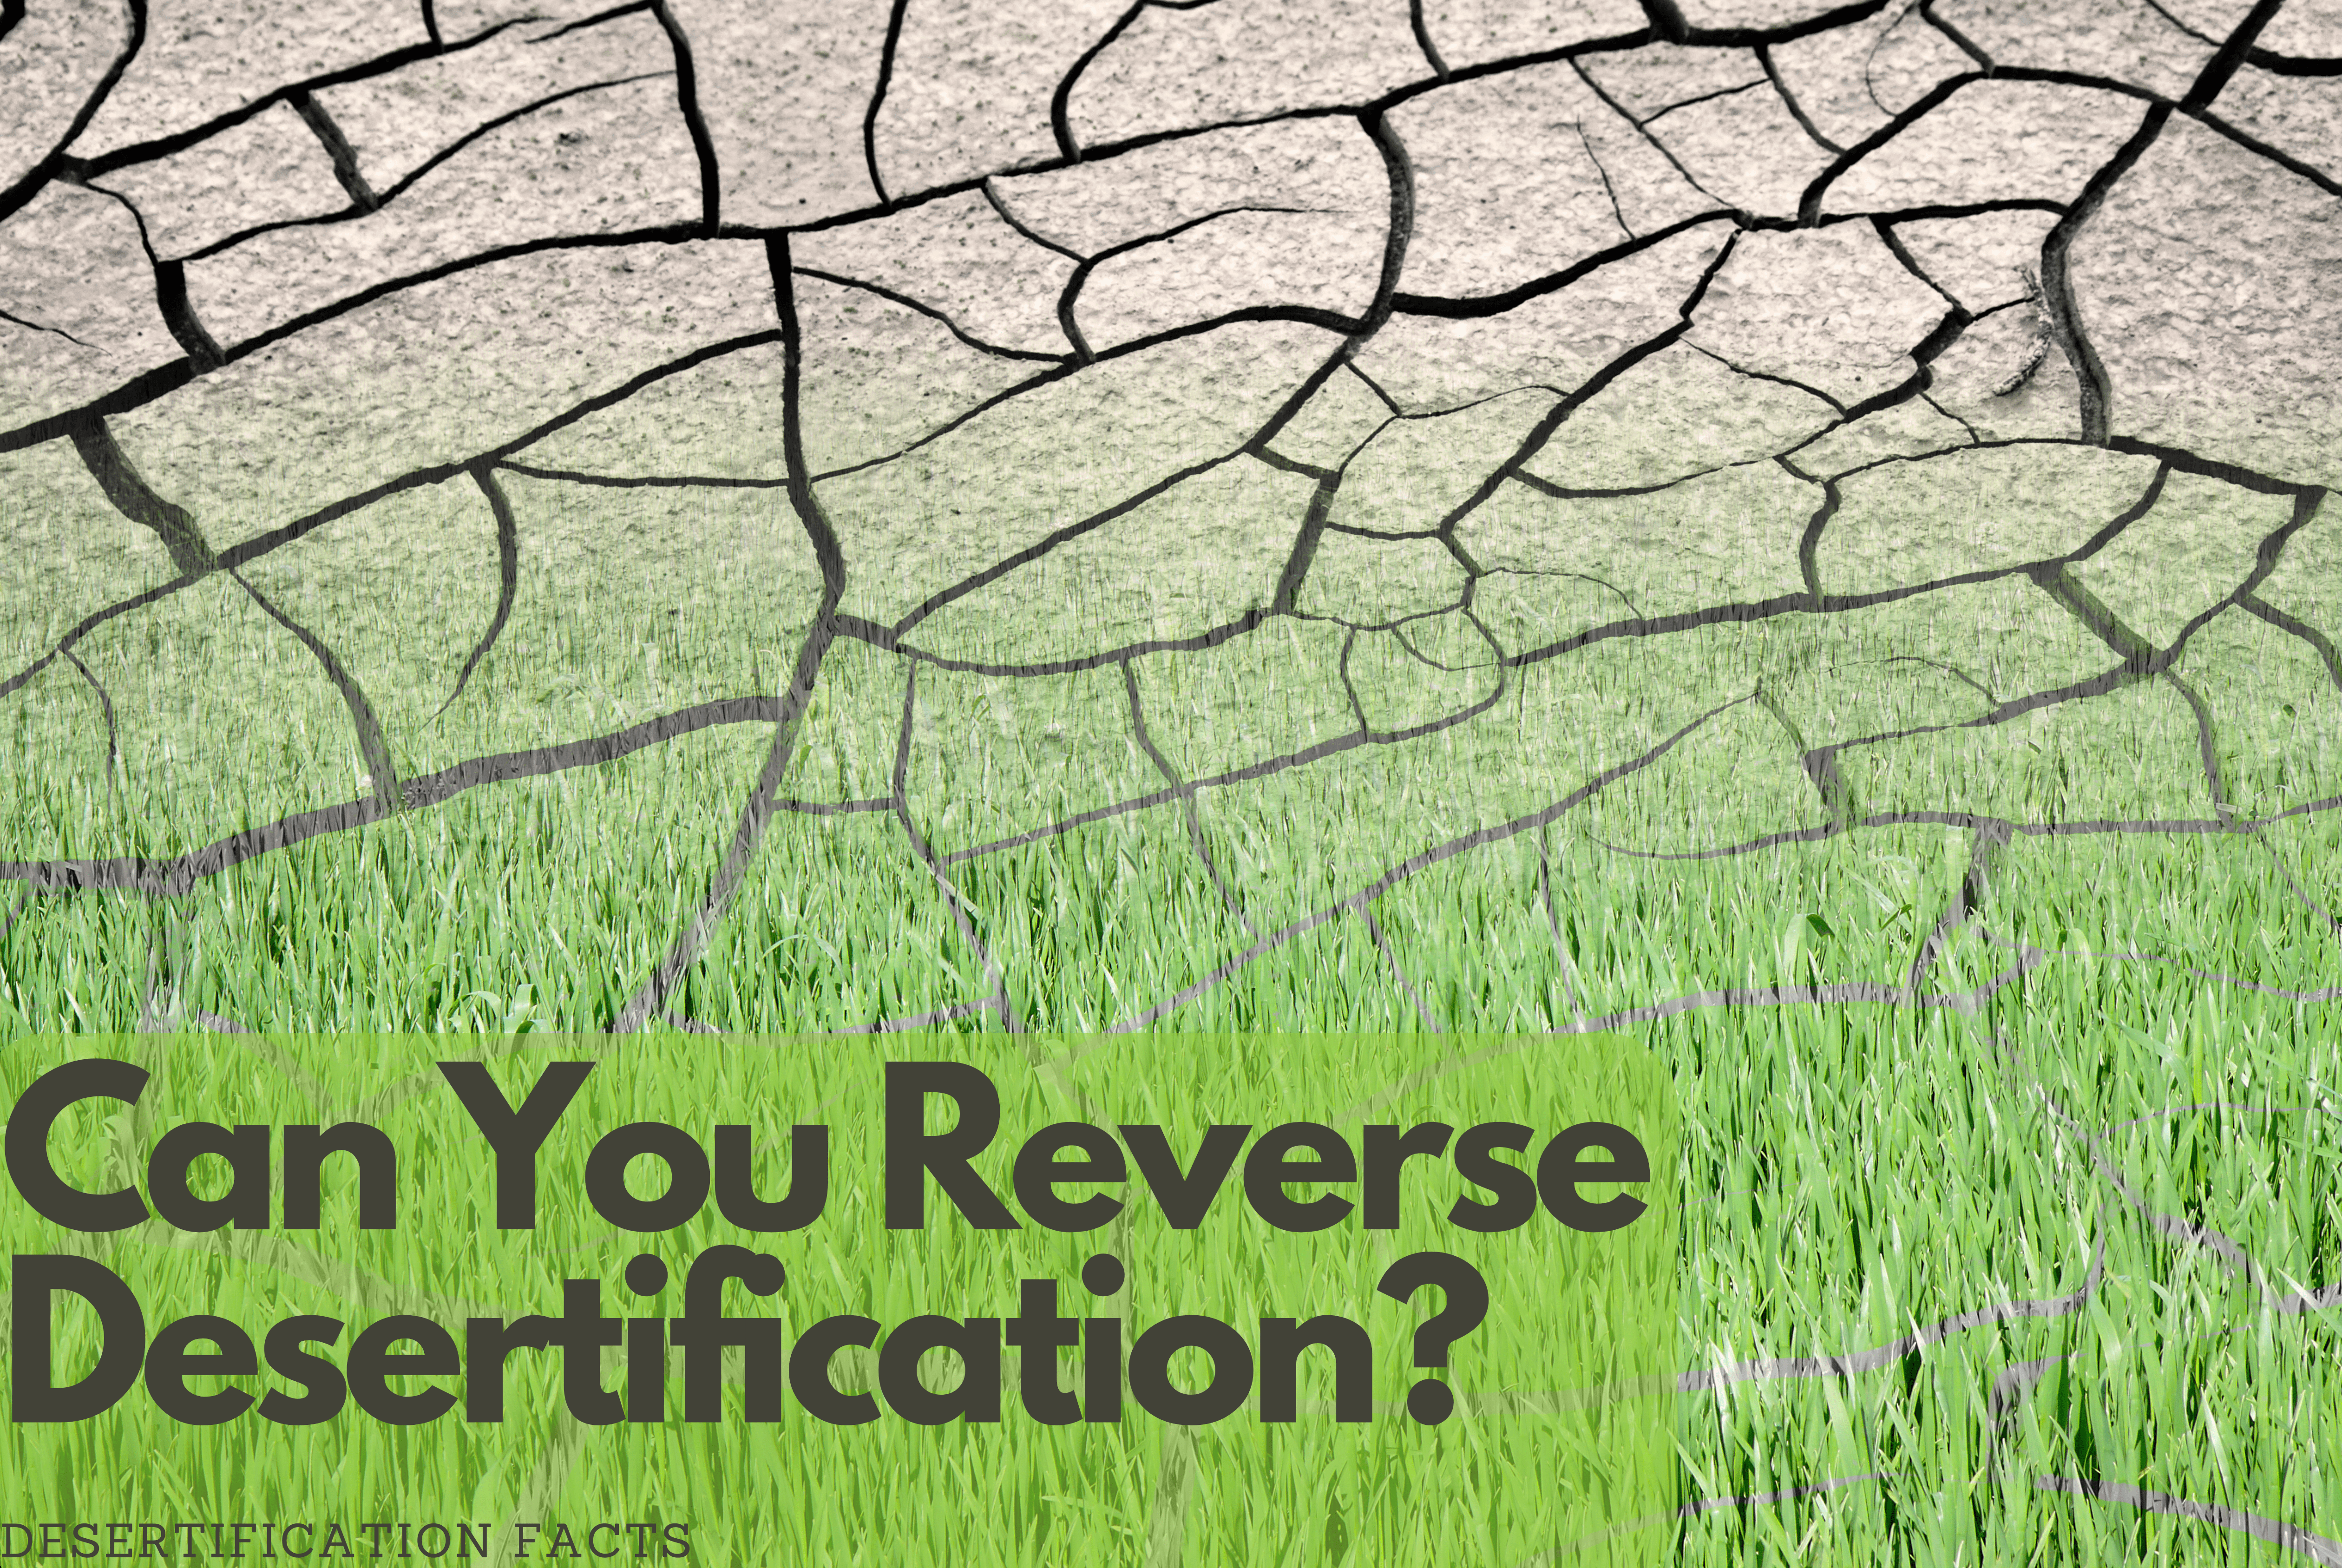 Can you reverse desertification?